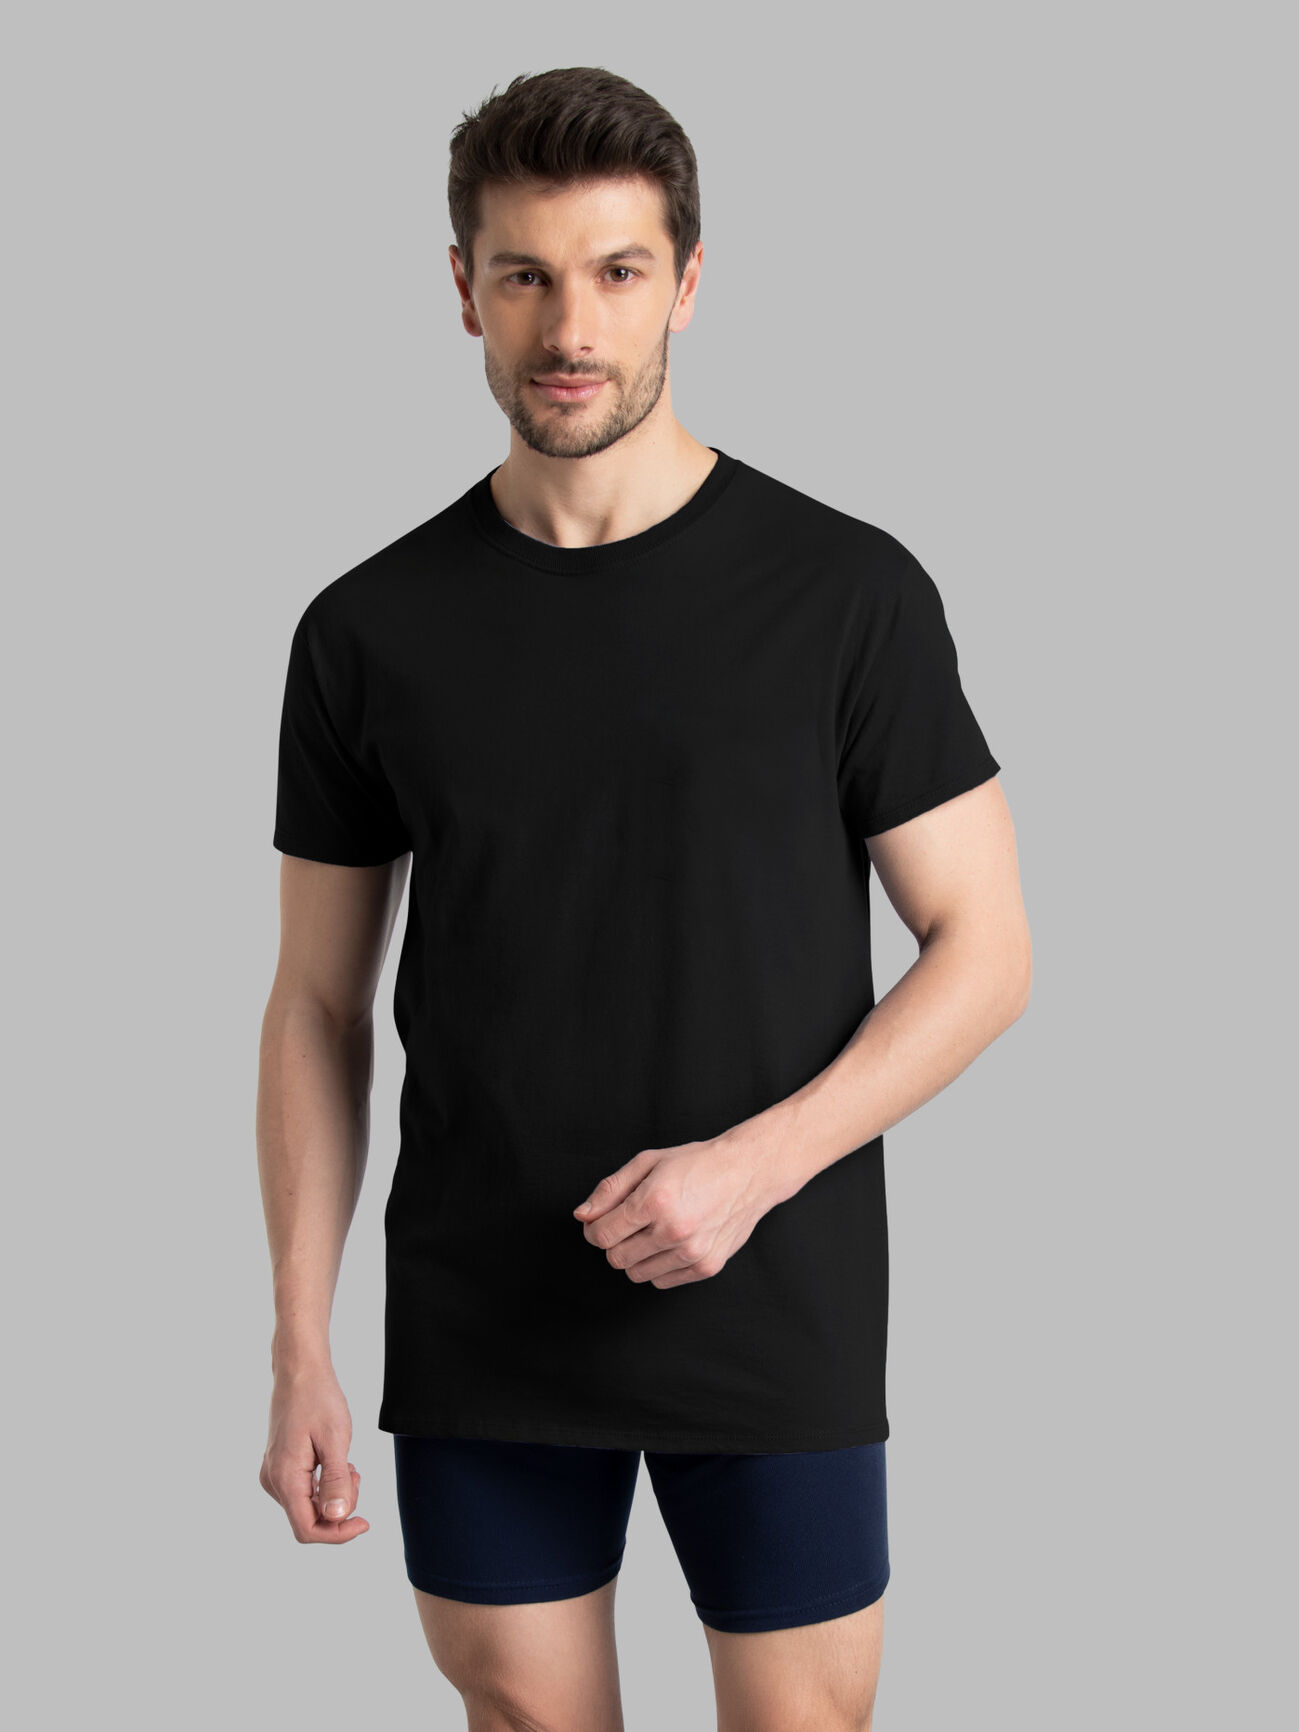 3 & 5 Pack Mens T Shirts Cotton Plain Short Sleeve Round Crew Neck  Multipack Tee